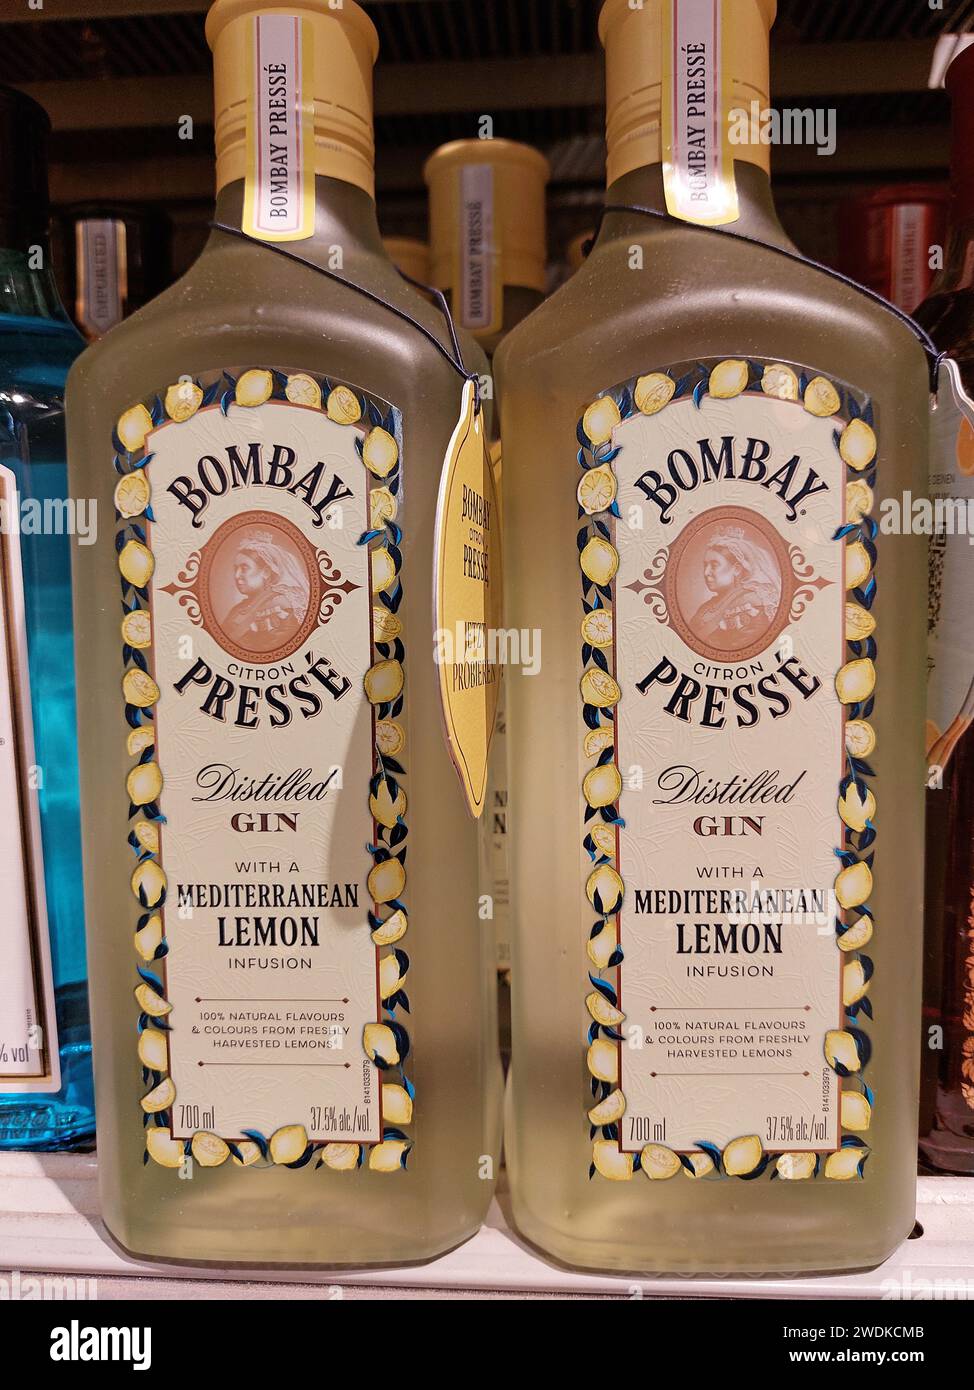 Bombay Gin bottles in a supermarket Stock Photo